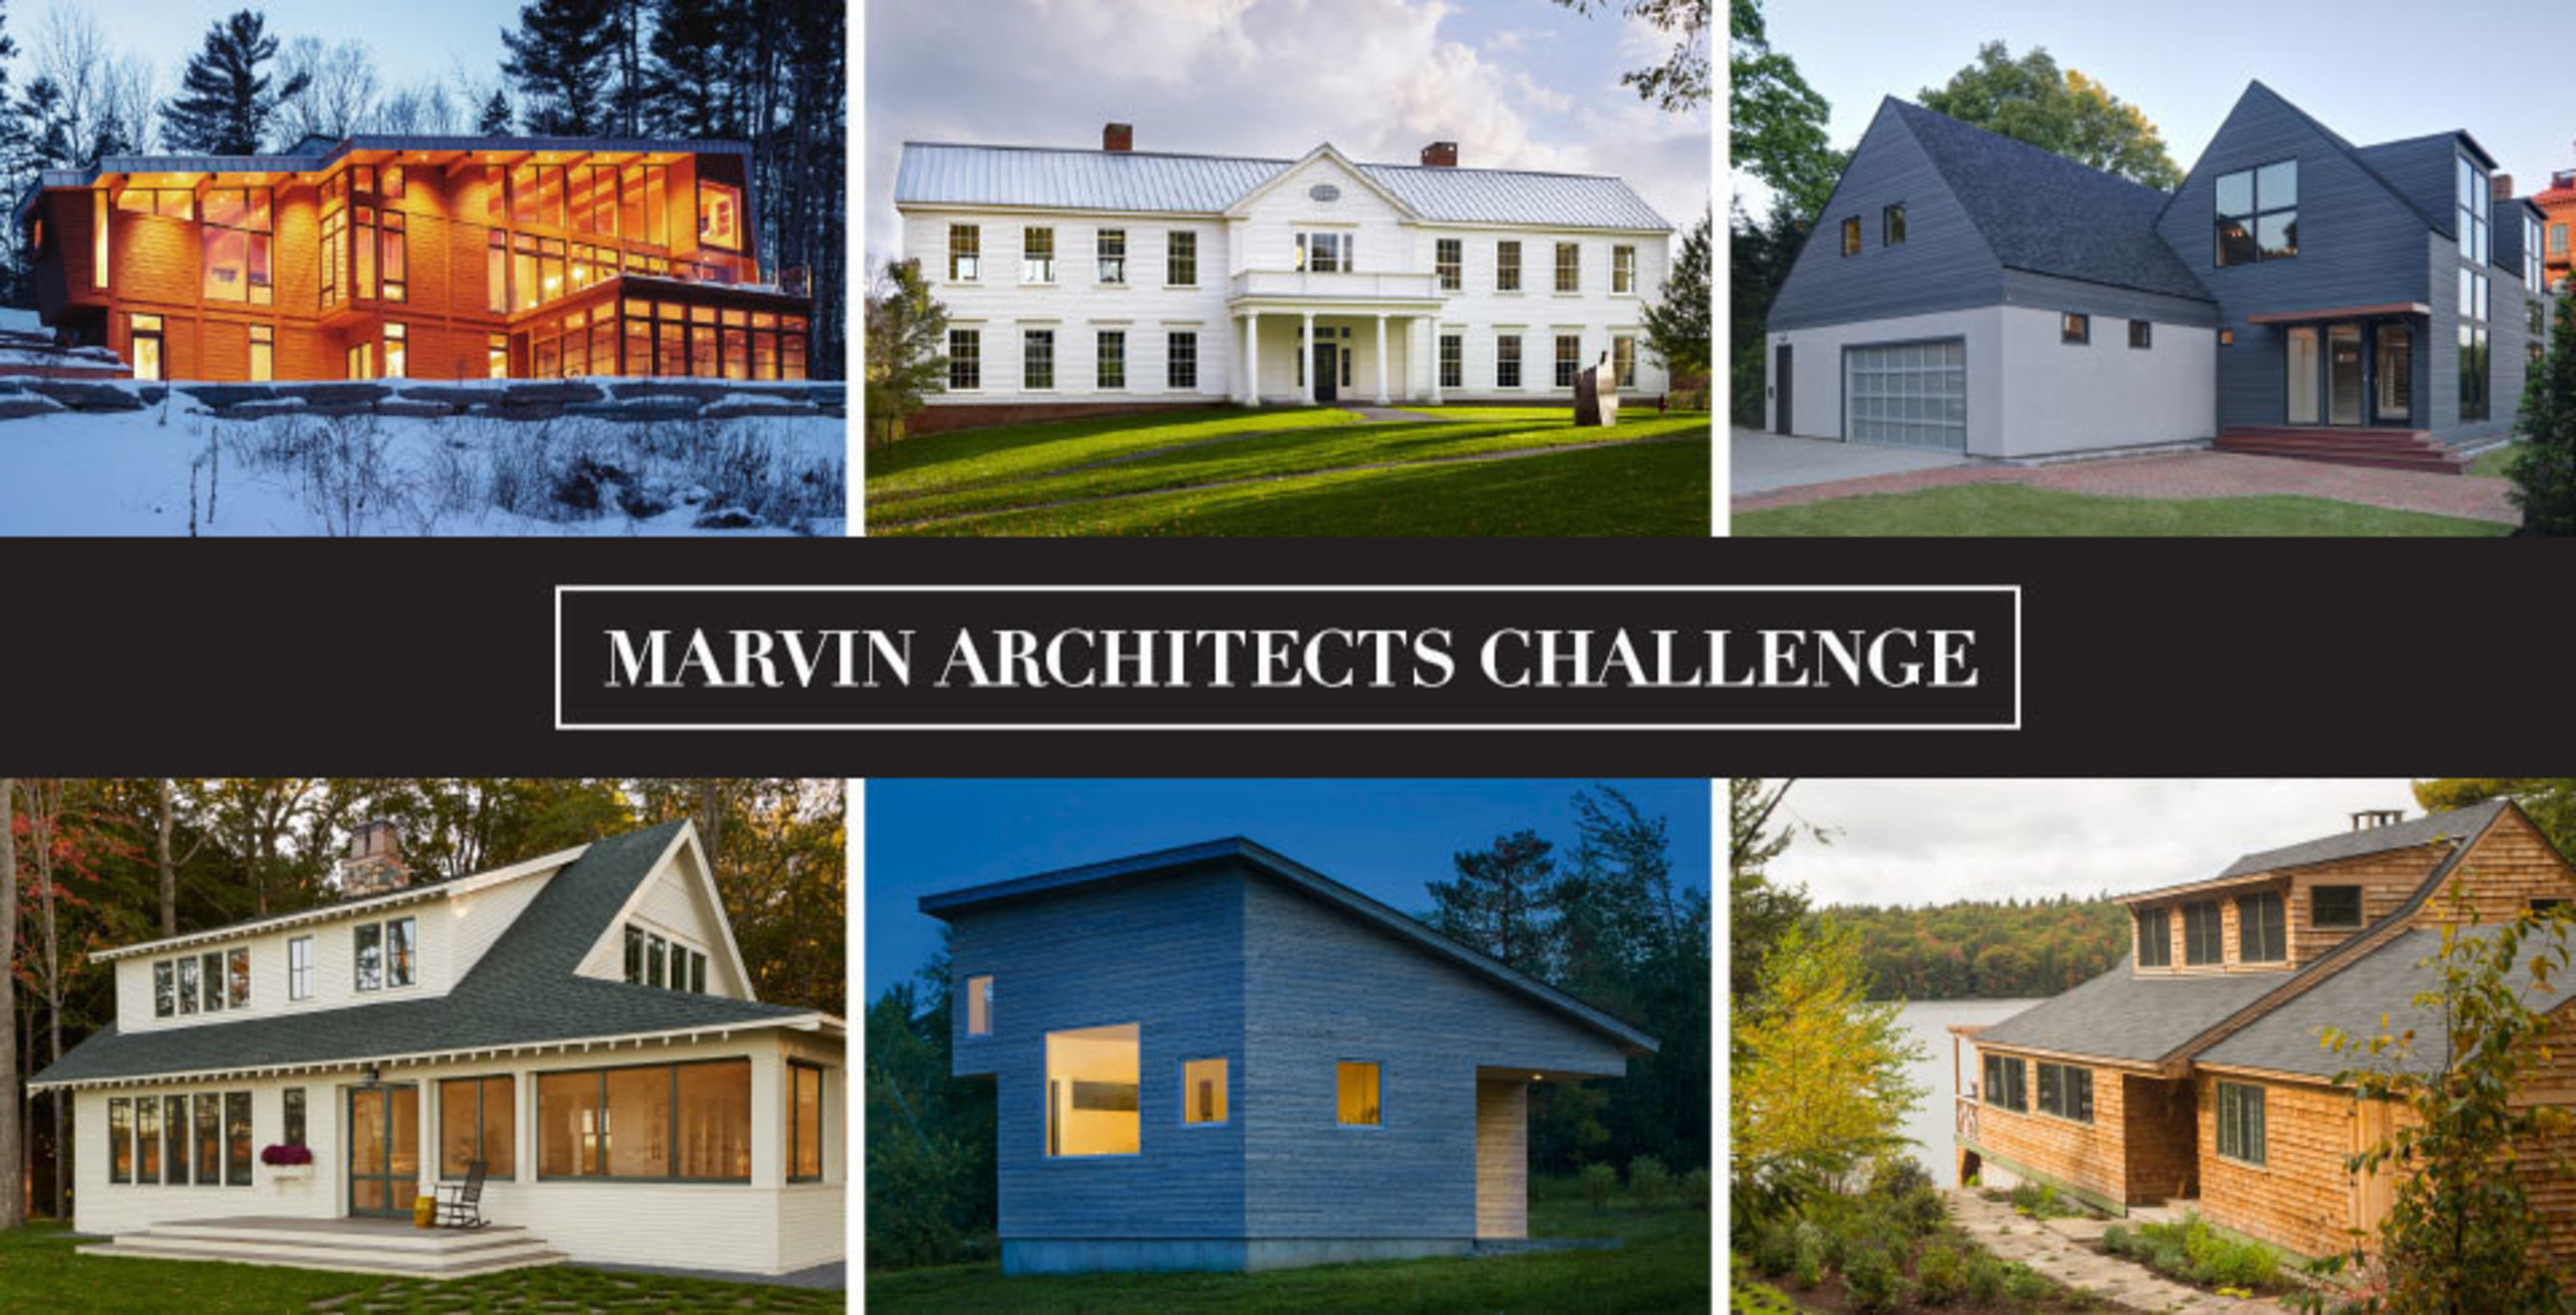 Marvin has announced its 2016 Architects Challenge winners in six categories: Best In Show,  Best Contemporary, Best Transitional, Best Traditional New Construction, Best Remodel/Addition, and Best Commercial. See all the winners at www.marvin.com/ArchitectsChallenge.